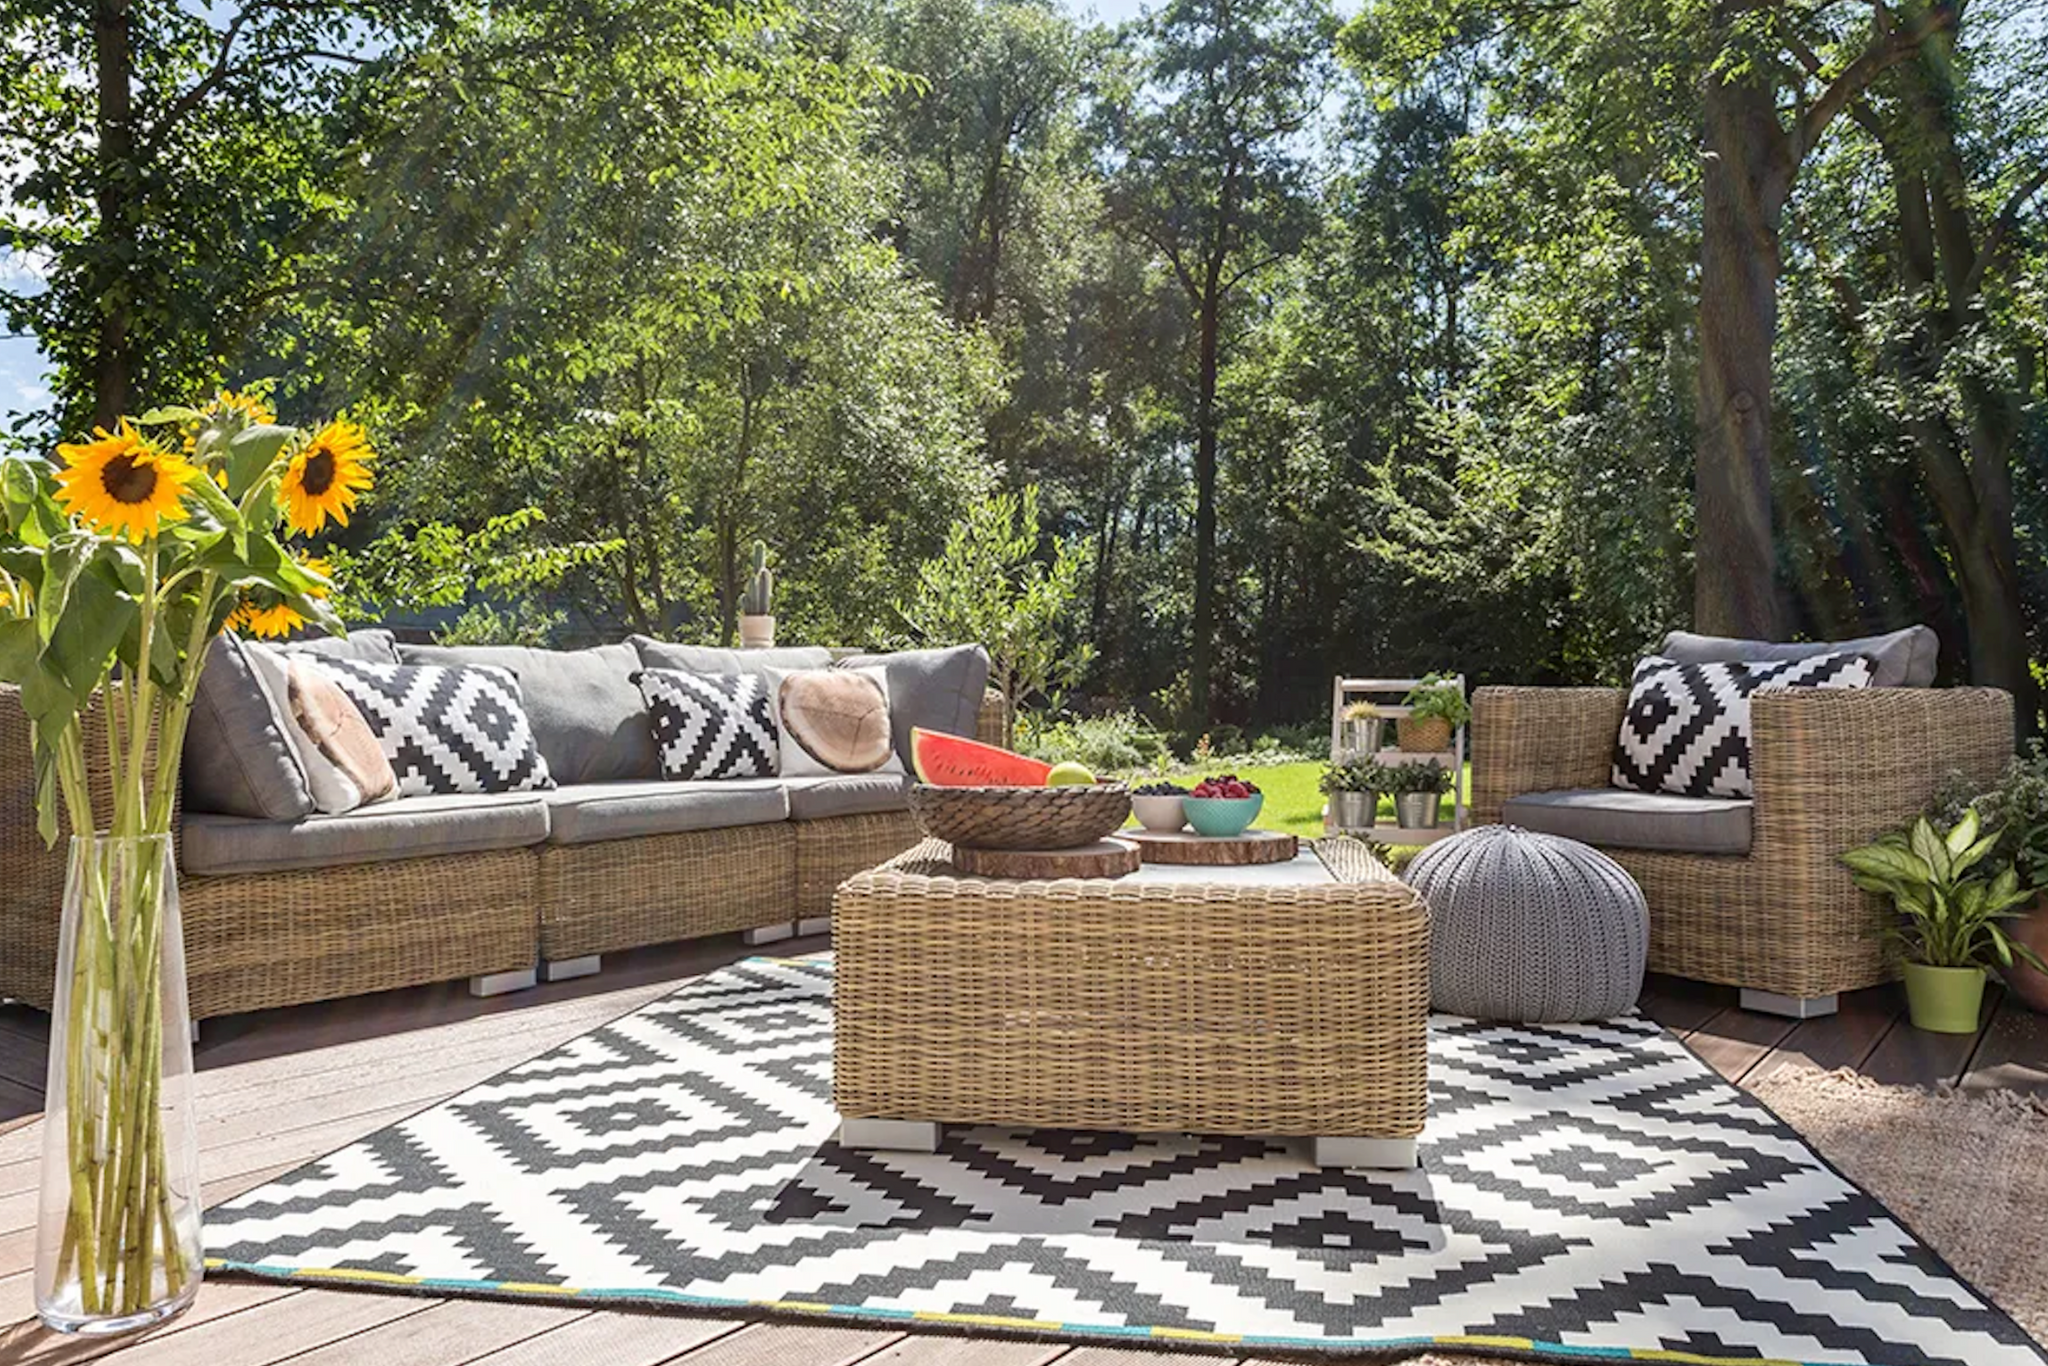 How to Pick the Perfect Outdoor Handmade Area Rug for Summer